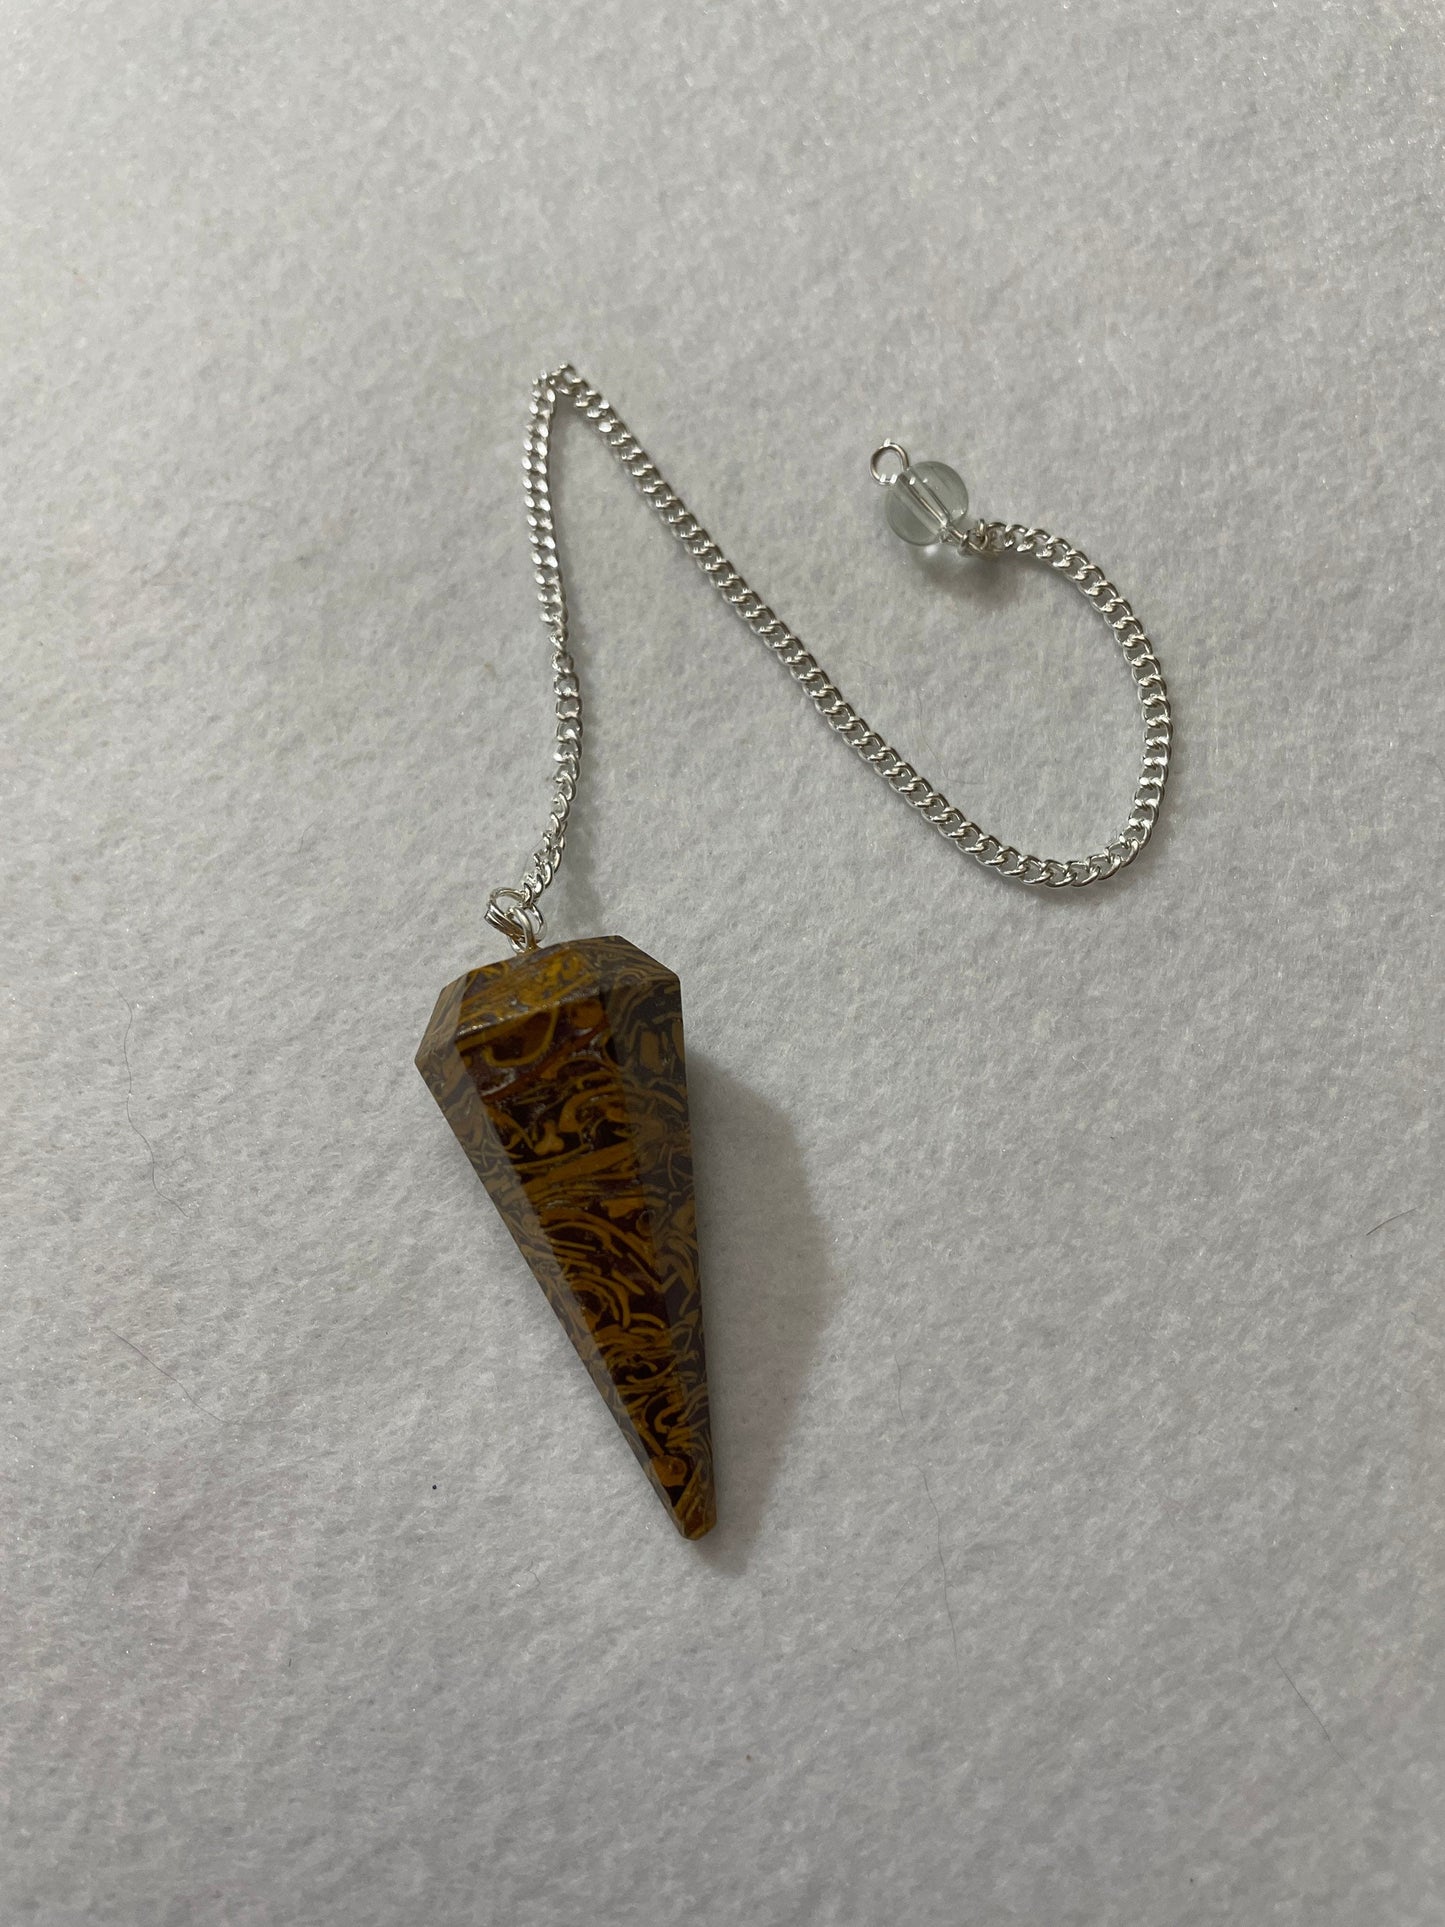 This Mariam Jasper Pendulum is  1.75” and with the chain is 8.5”.